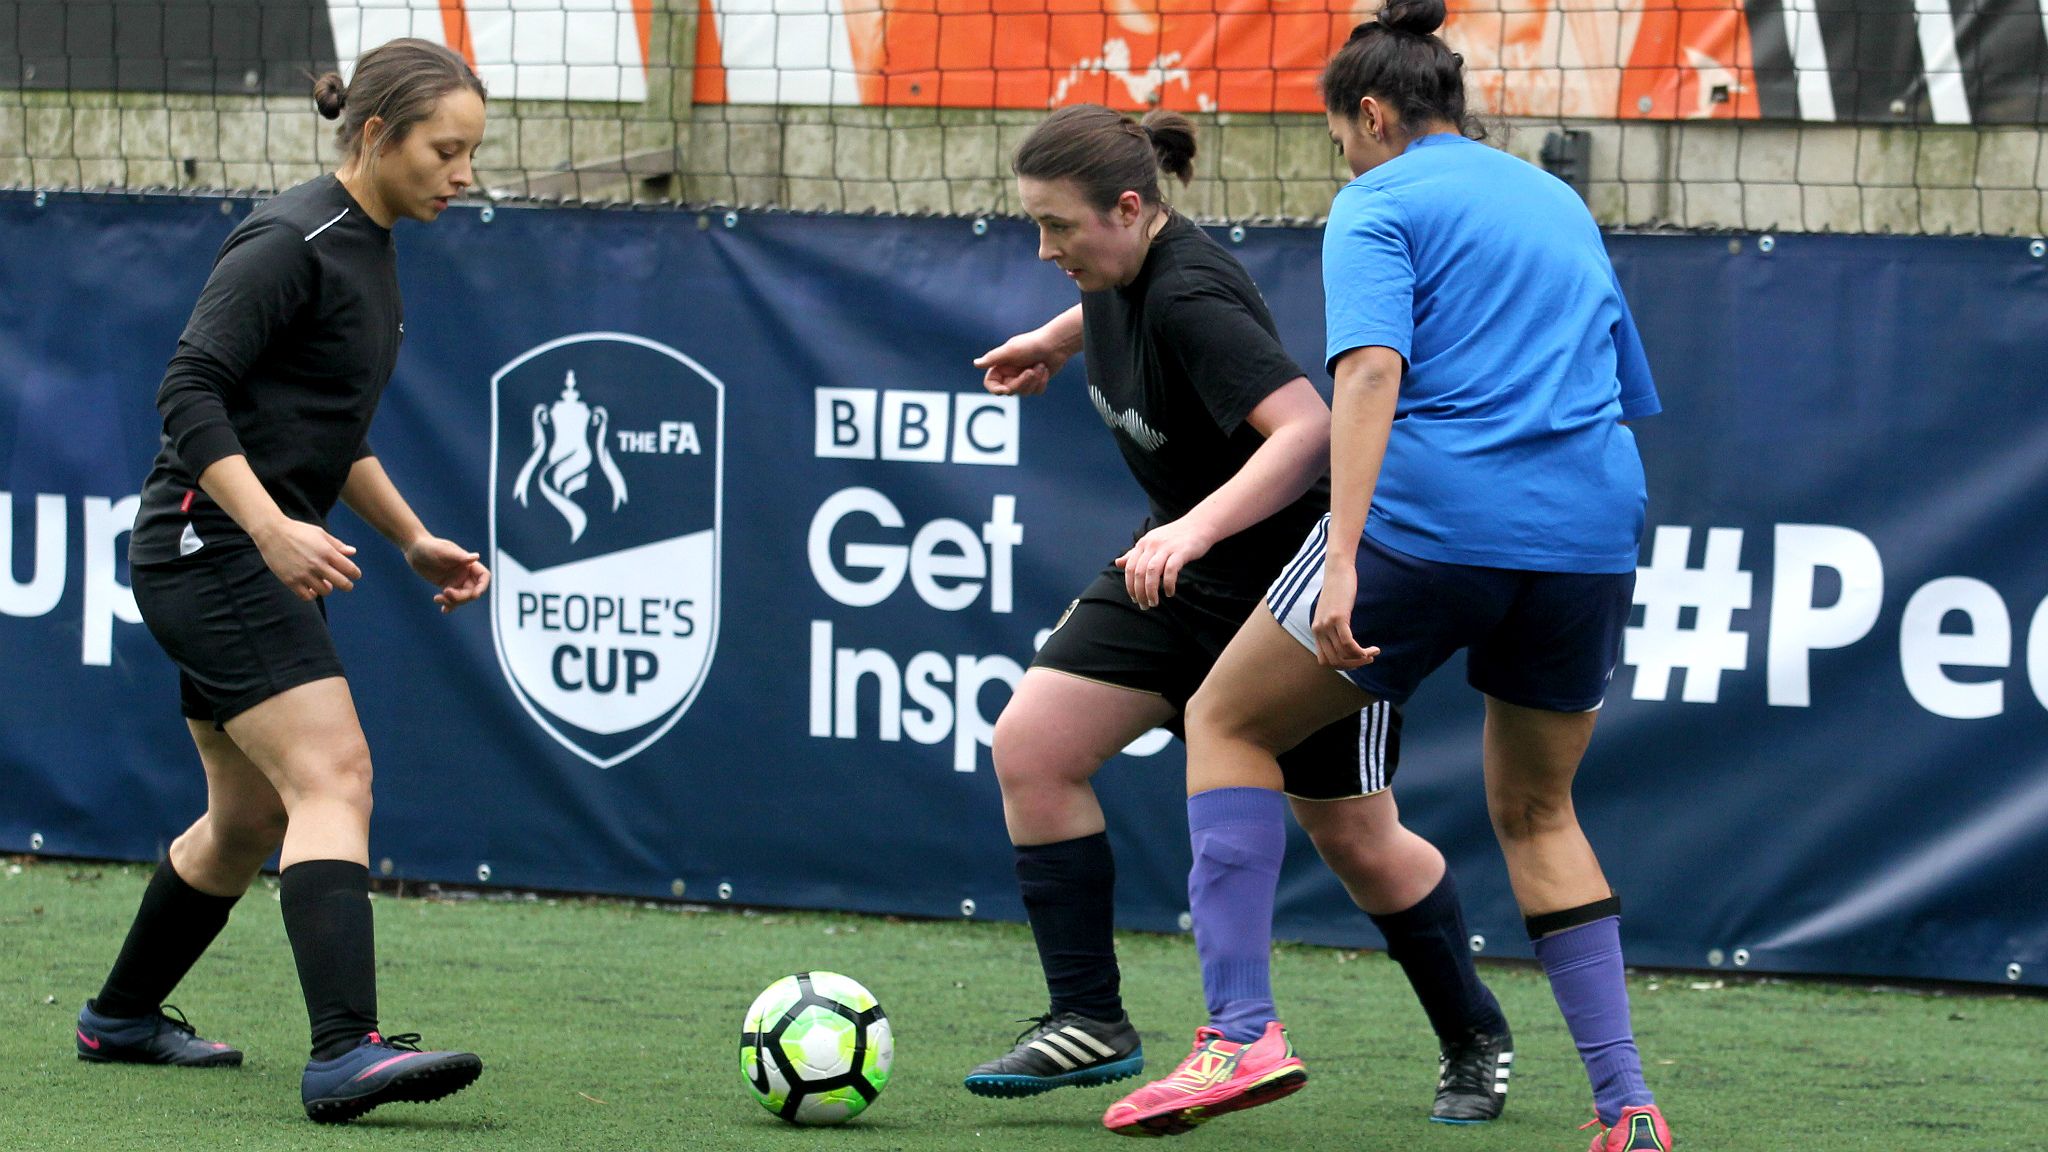 FA People's Cup action